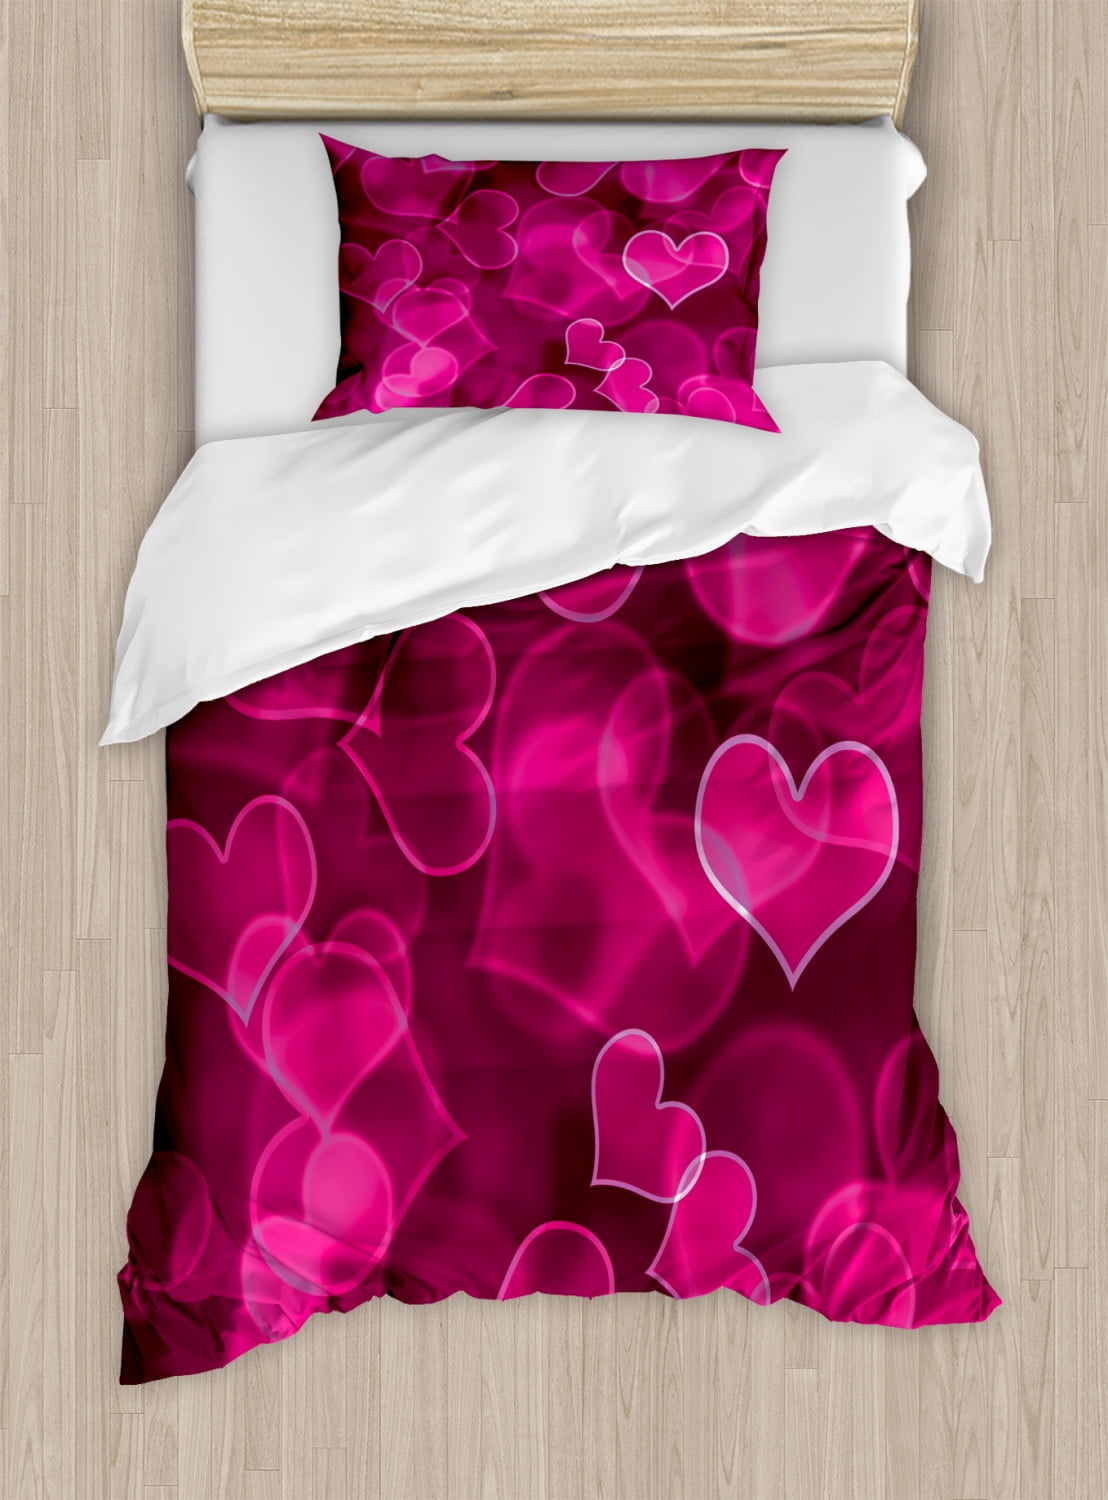 Details about   Cute Pink Bed Sheets And Pillowcases Embroidery Bedding Sets Duvet Cover Unicorn 